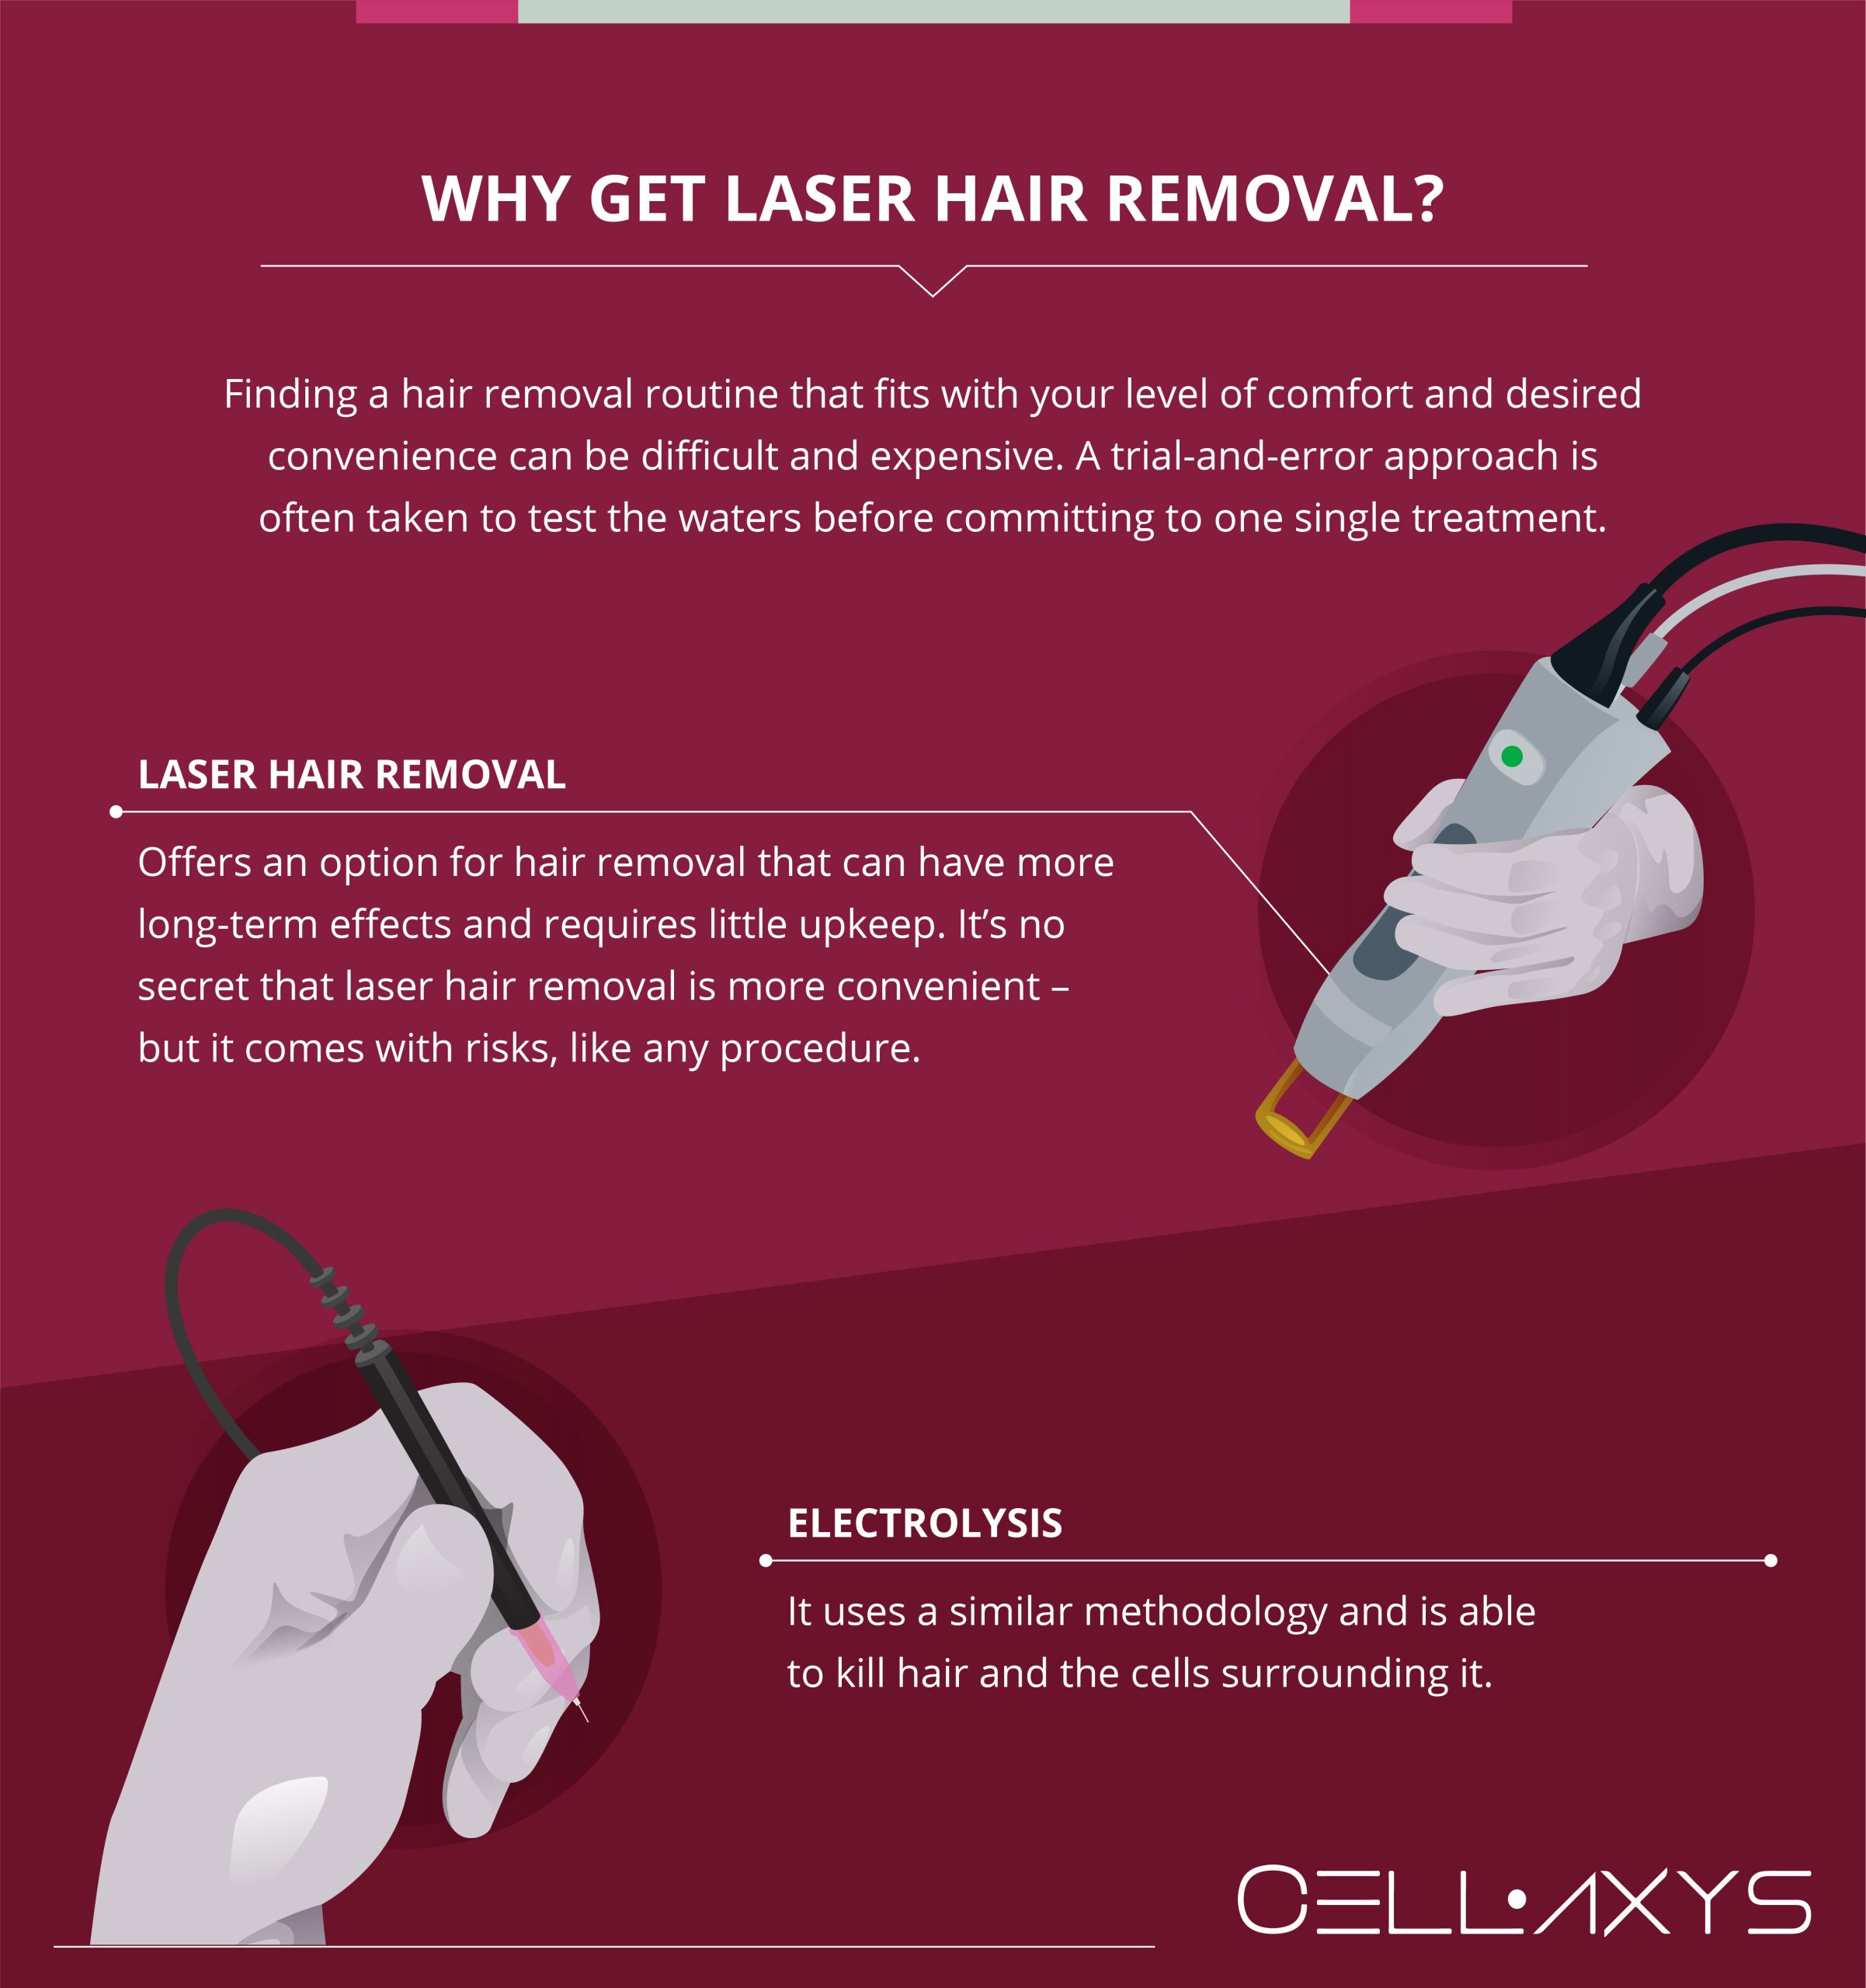 Side Effects Of Laser Hair Removal - Cellaxys